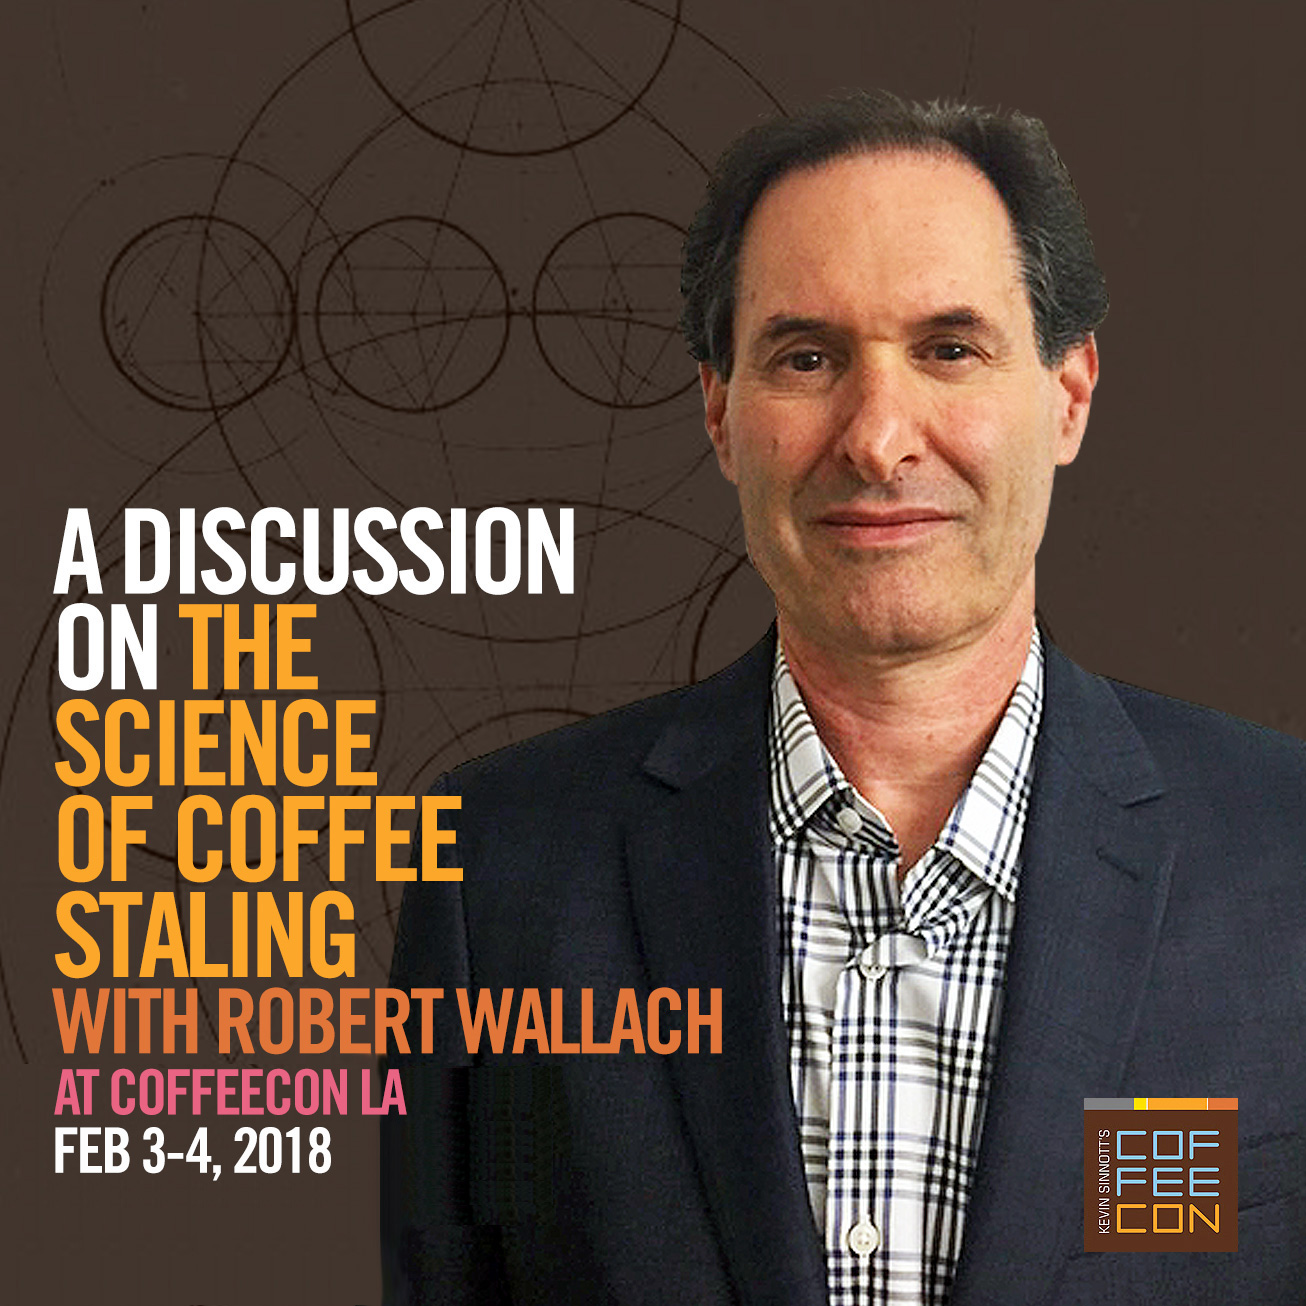 The Science of Coffee Staling with Robert Wallach